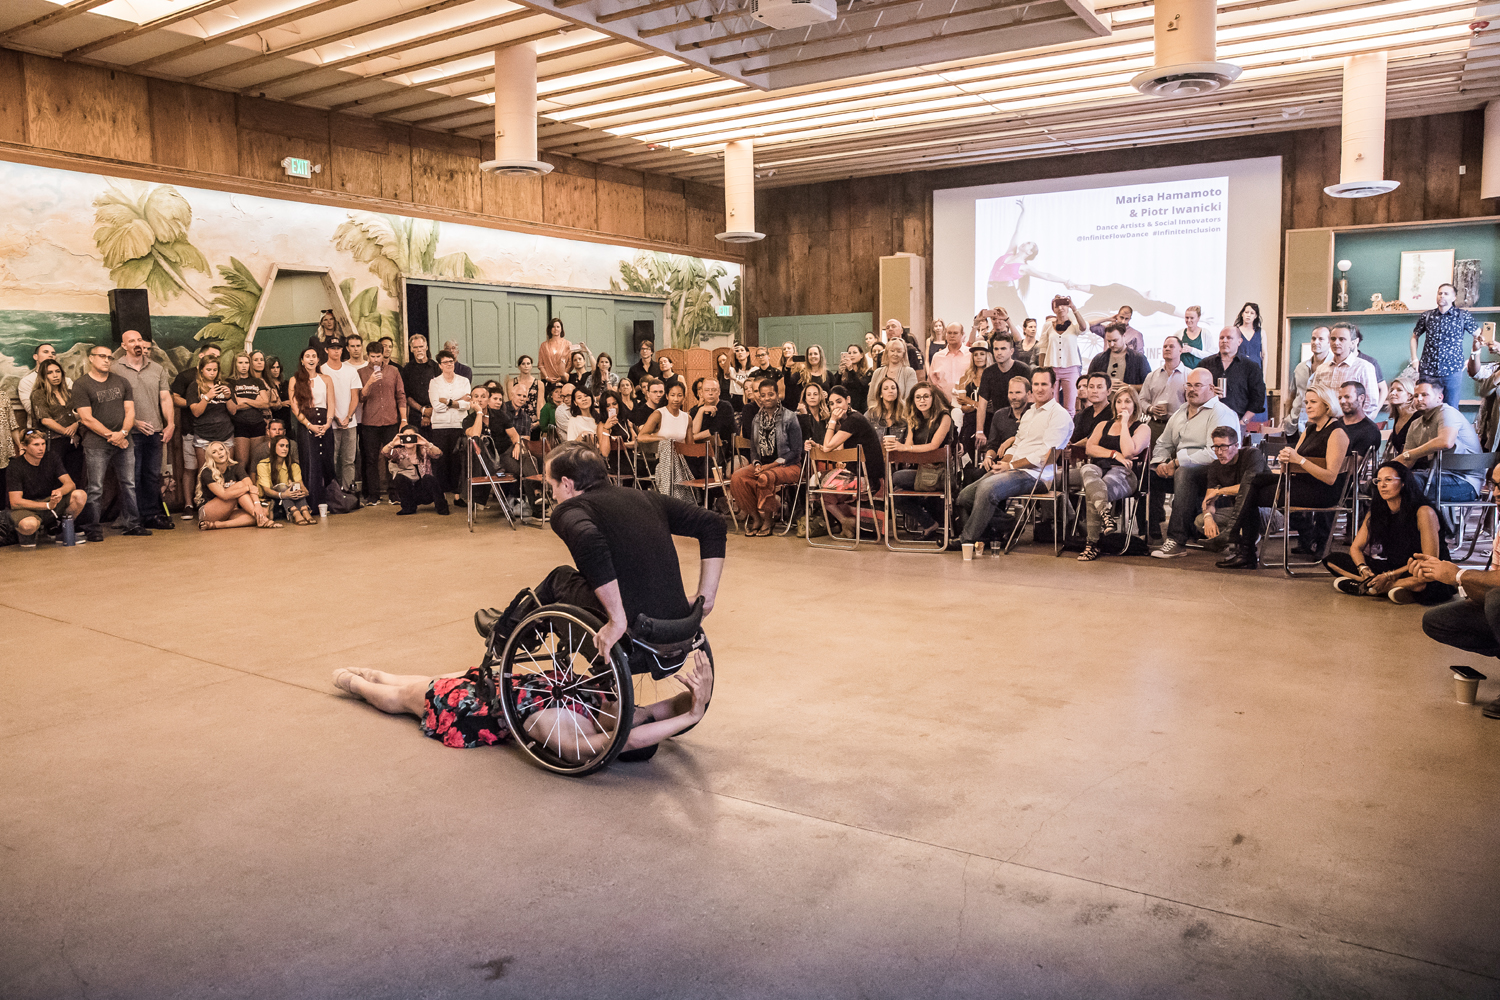 Image: One dancer lies beneath another in a wheelchair. We see the back of the dancer in the wheelchair. An audience watches them in a semicircle, some people seated and some standing. The audience and dancers are on the same level; there is no stage.